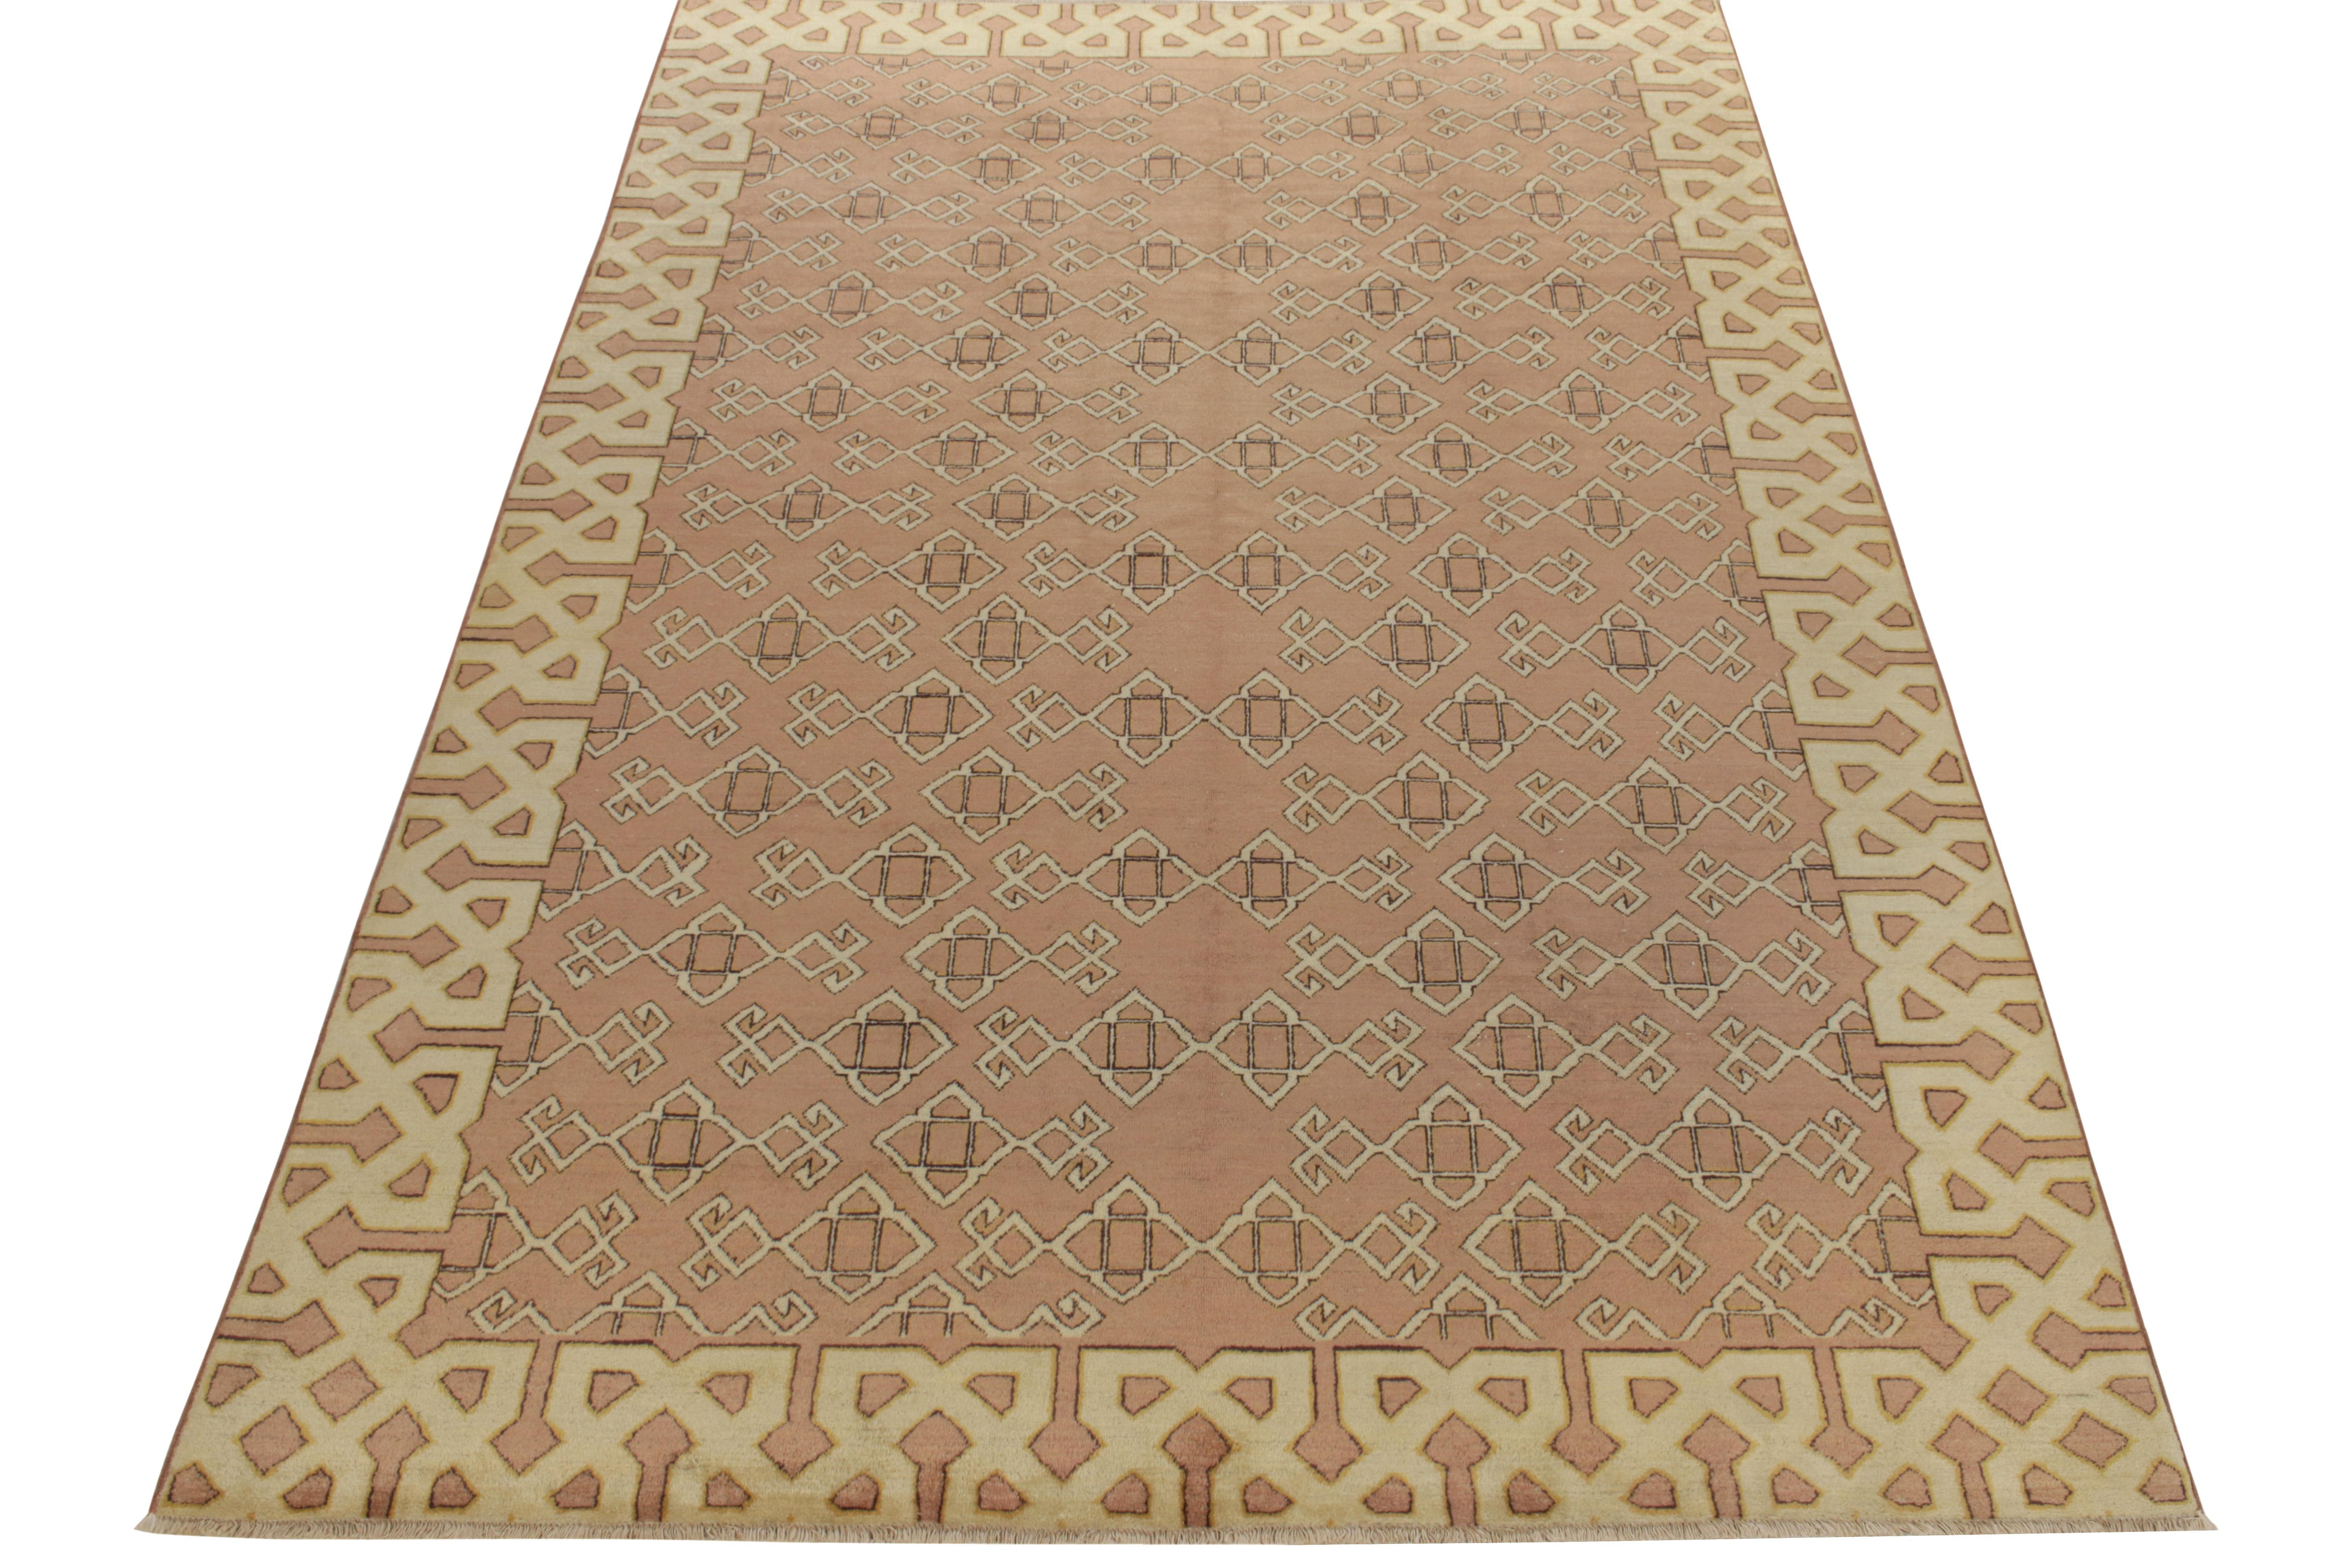 Incorporating a refined geometric pattern with tribal sensibilities, a 6x10 vintage drawing in mid century style from an acclaimed Turkish designer. The rug relishes a beige-brown colorway, deliciously complementing the natural element of distress